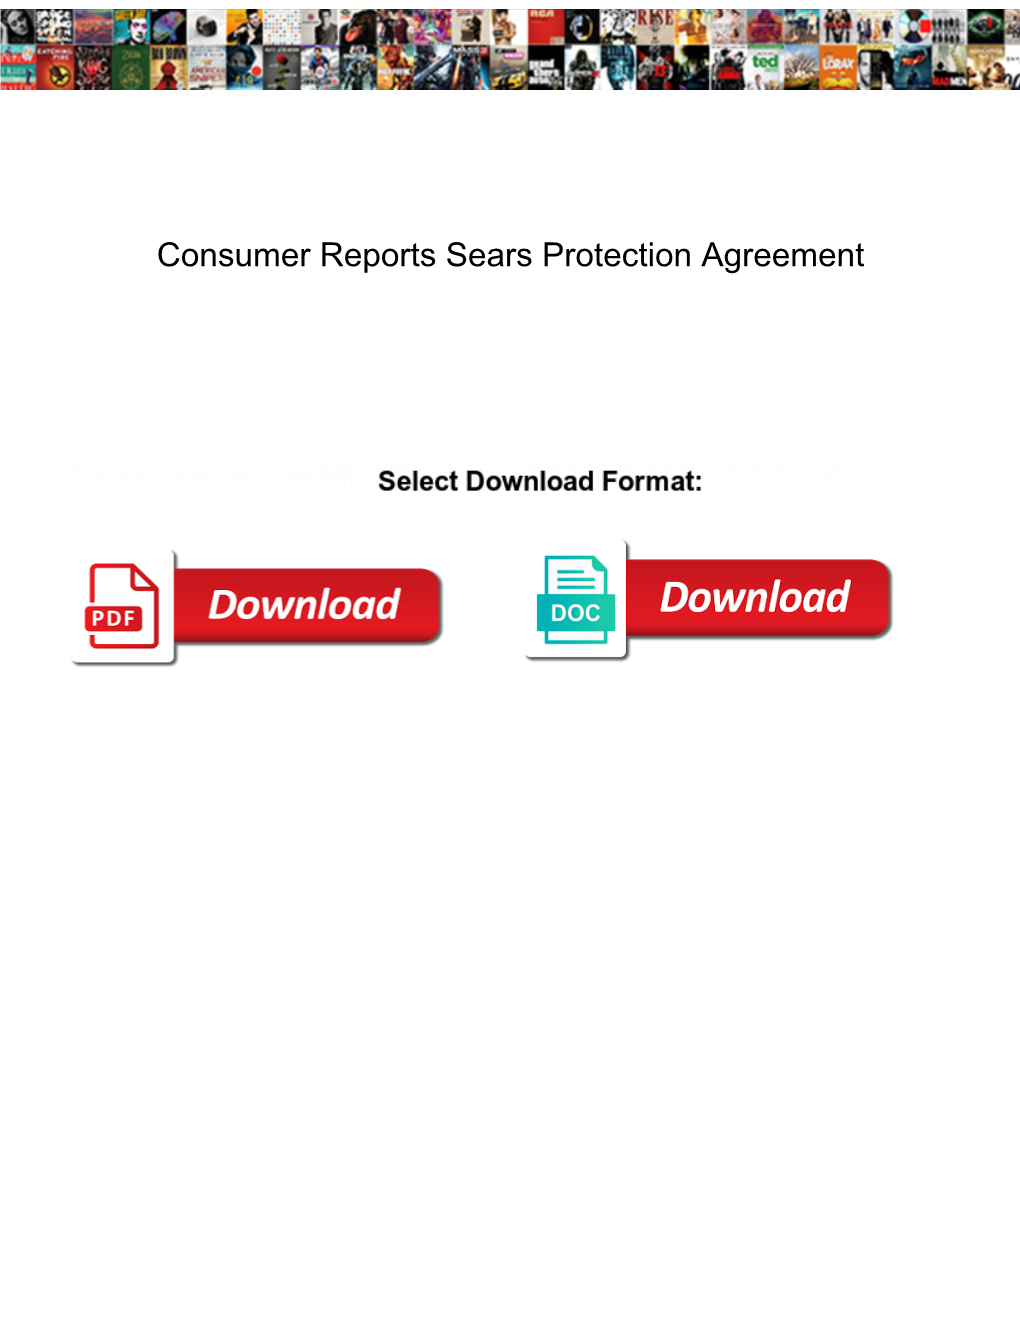 Consumer Reports Sears Protection Agreement